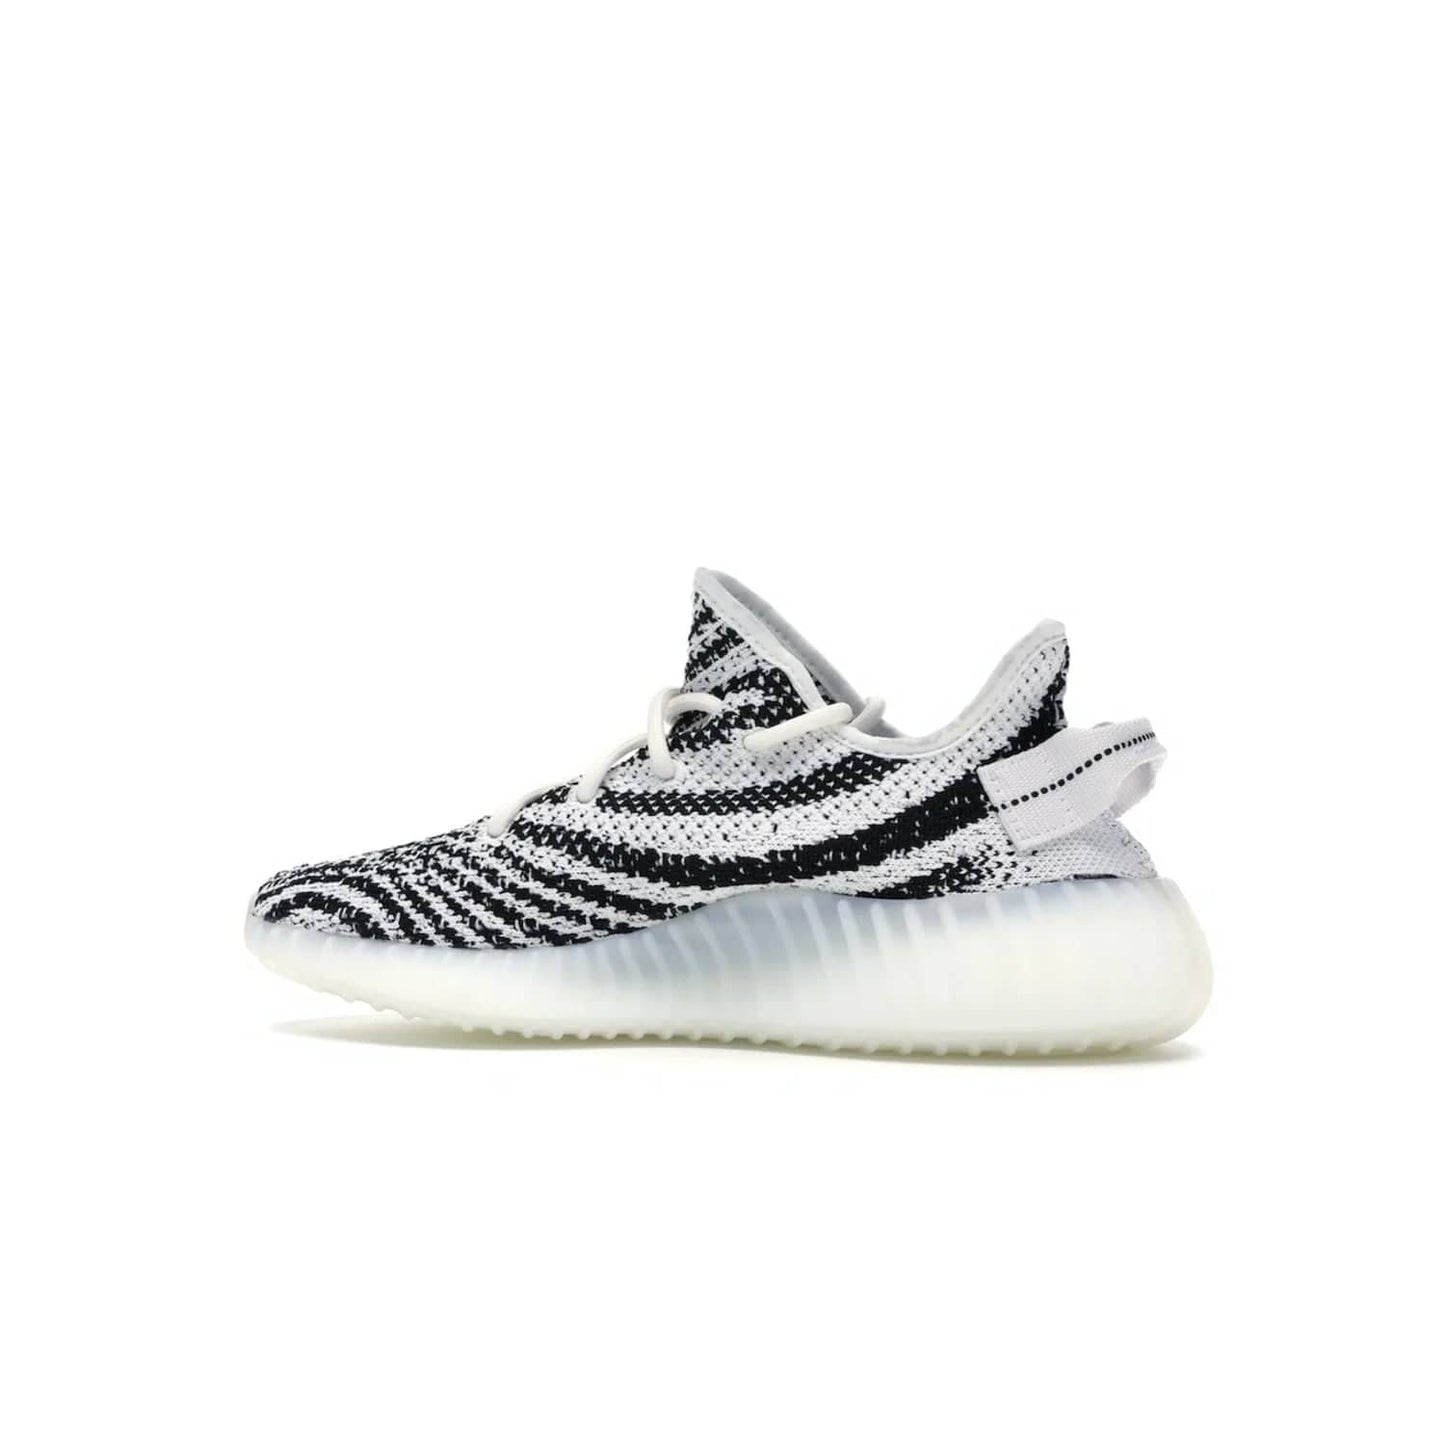 adidas Yeezy Boost 350 V2 Zebra - Image 21 - Only at www.BallersClubKickz.com - #
Score the iconic adidas Yeezy Boost 350 V2 Zebra for a fashionable addition to your street-style. Featuring a Primeknit upper and Boost sole, you'll look great and feel comfortable with every step.